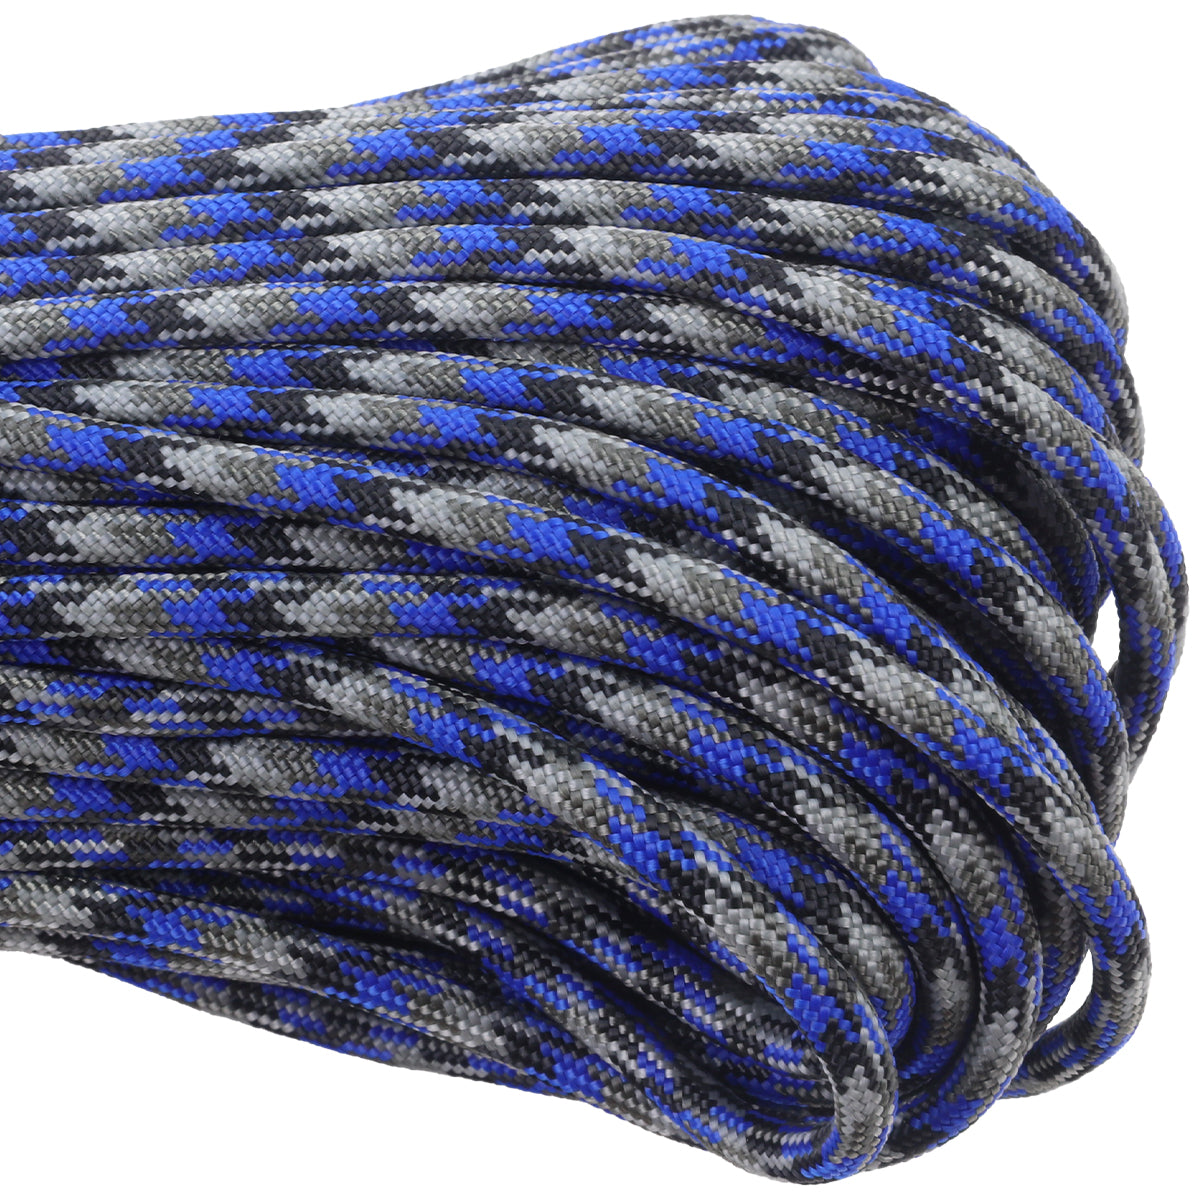 550 Paracord - Blue Steel – Atwood Rope MFG